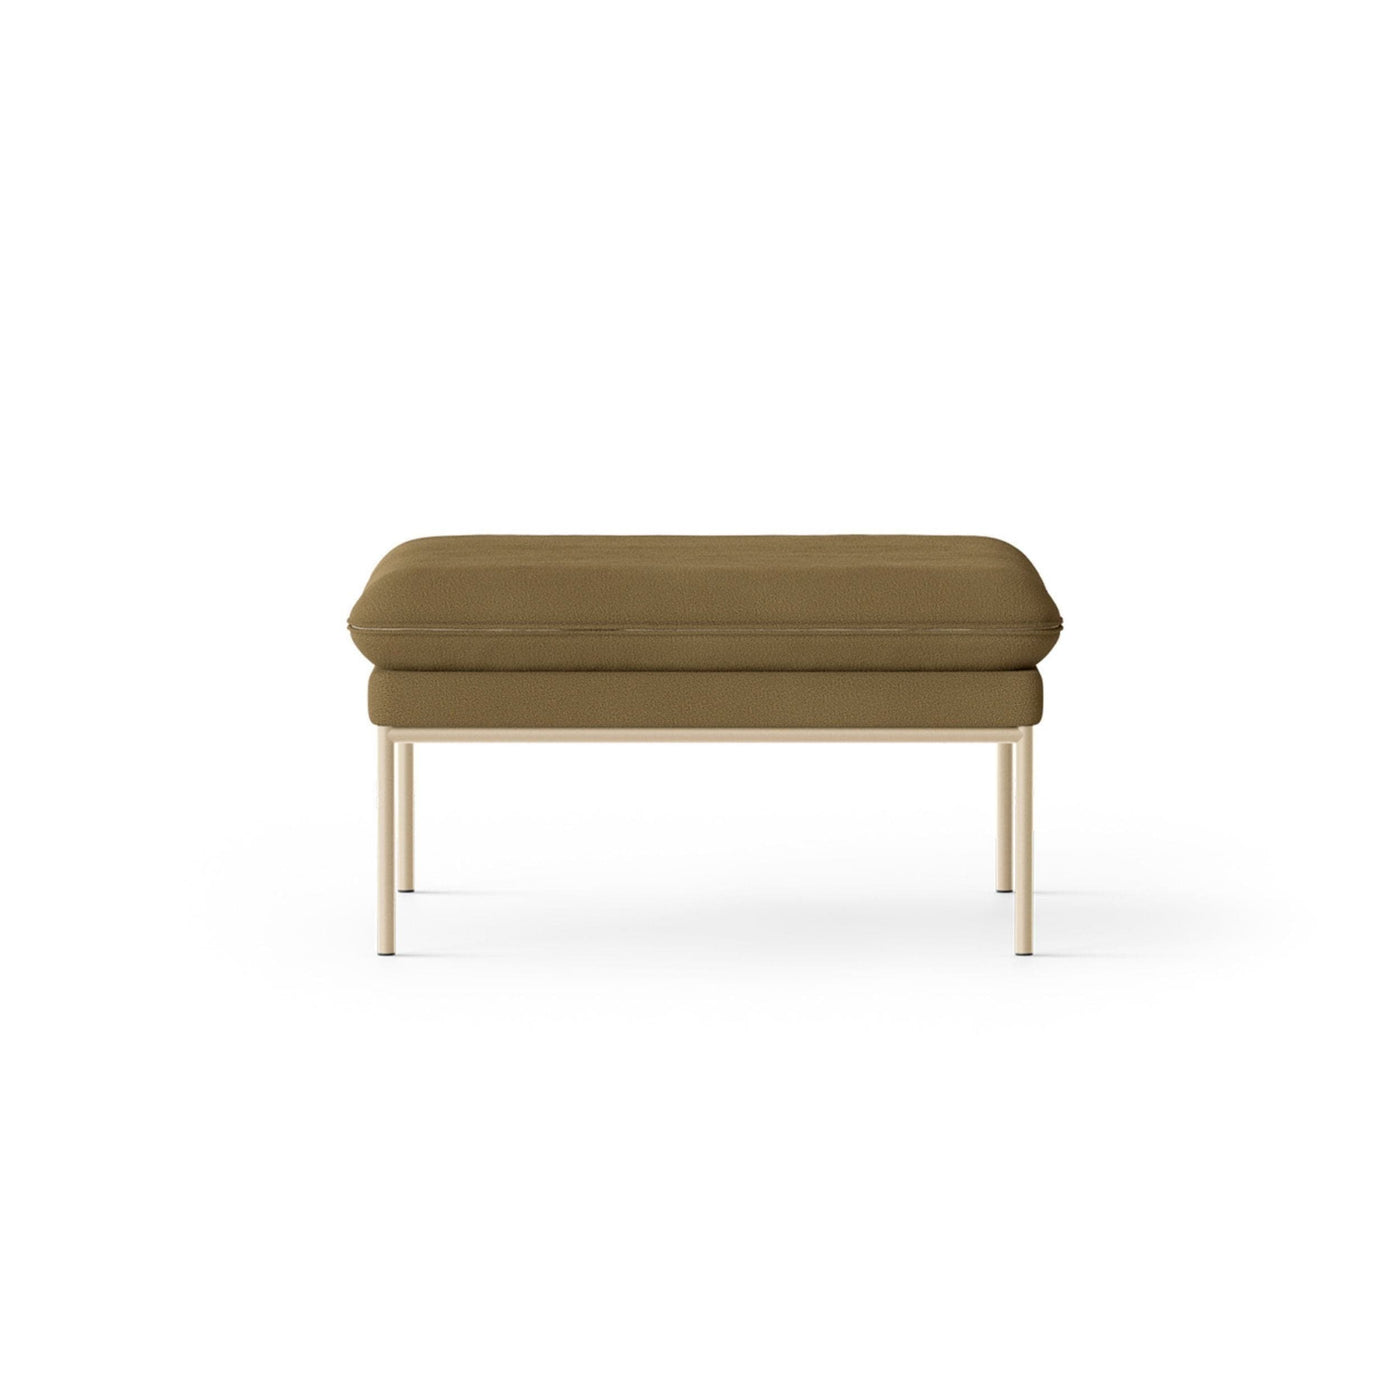 Tonus 974 by Kvadrat. Sofa fabric made to order for Rico and Turn sofas. Order free fabric swatches at someday designs.